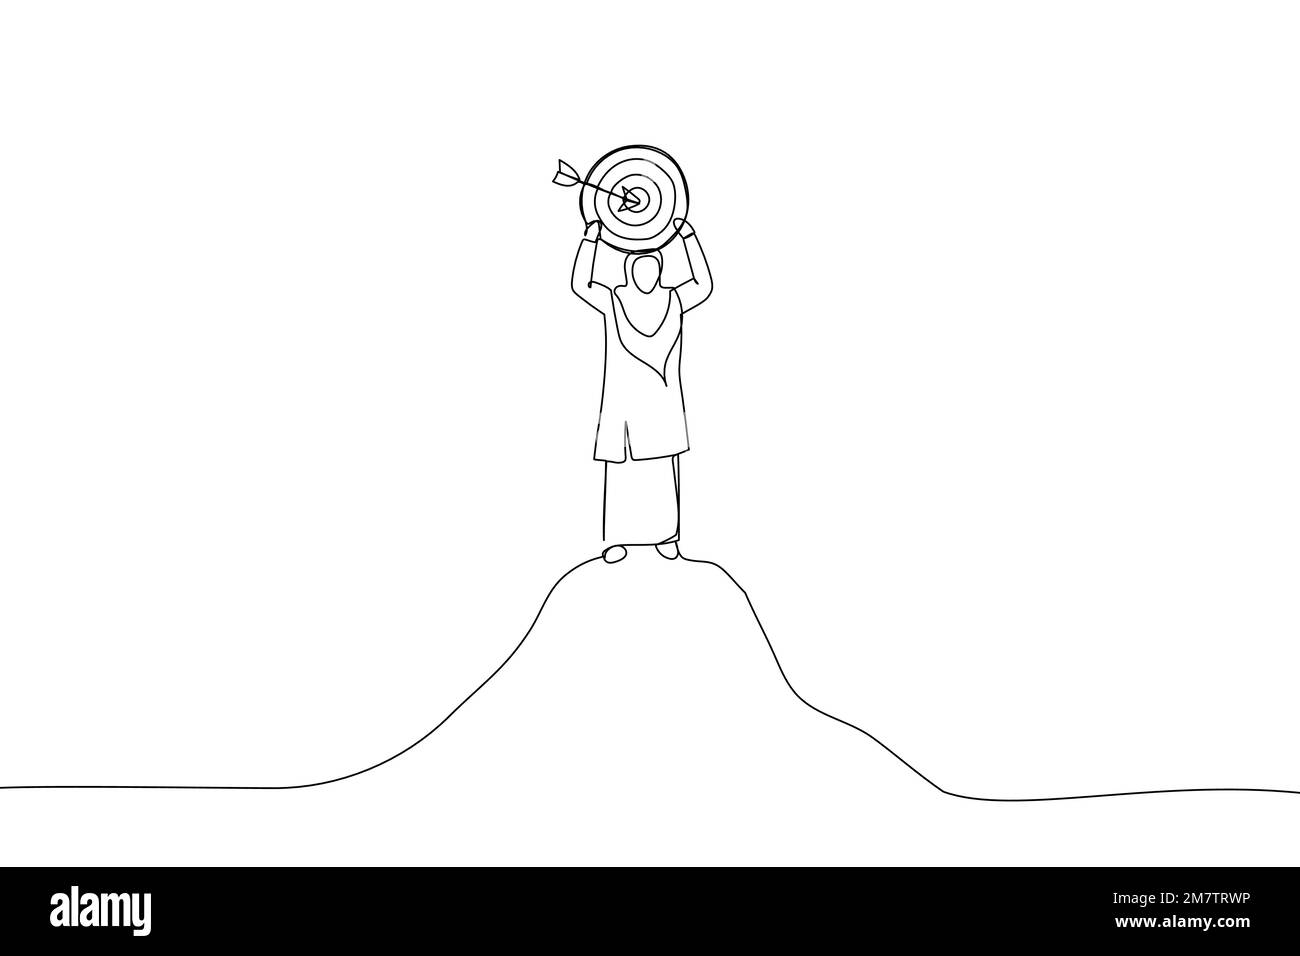 Cartoon of muslim businesswoman holding a target board on top of mountain. Metaphor for aim, objective and achievement. Continuous line art Stock Vector